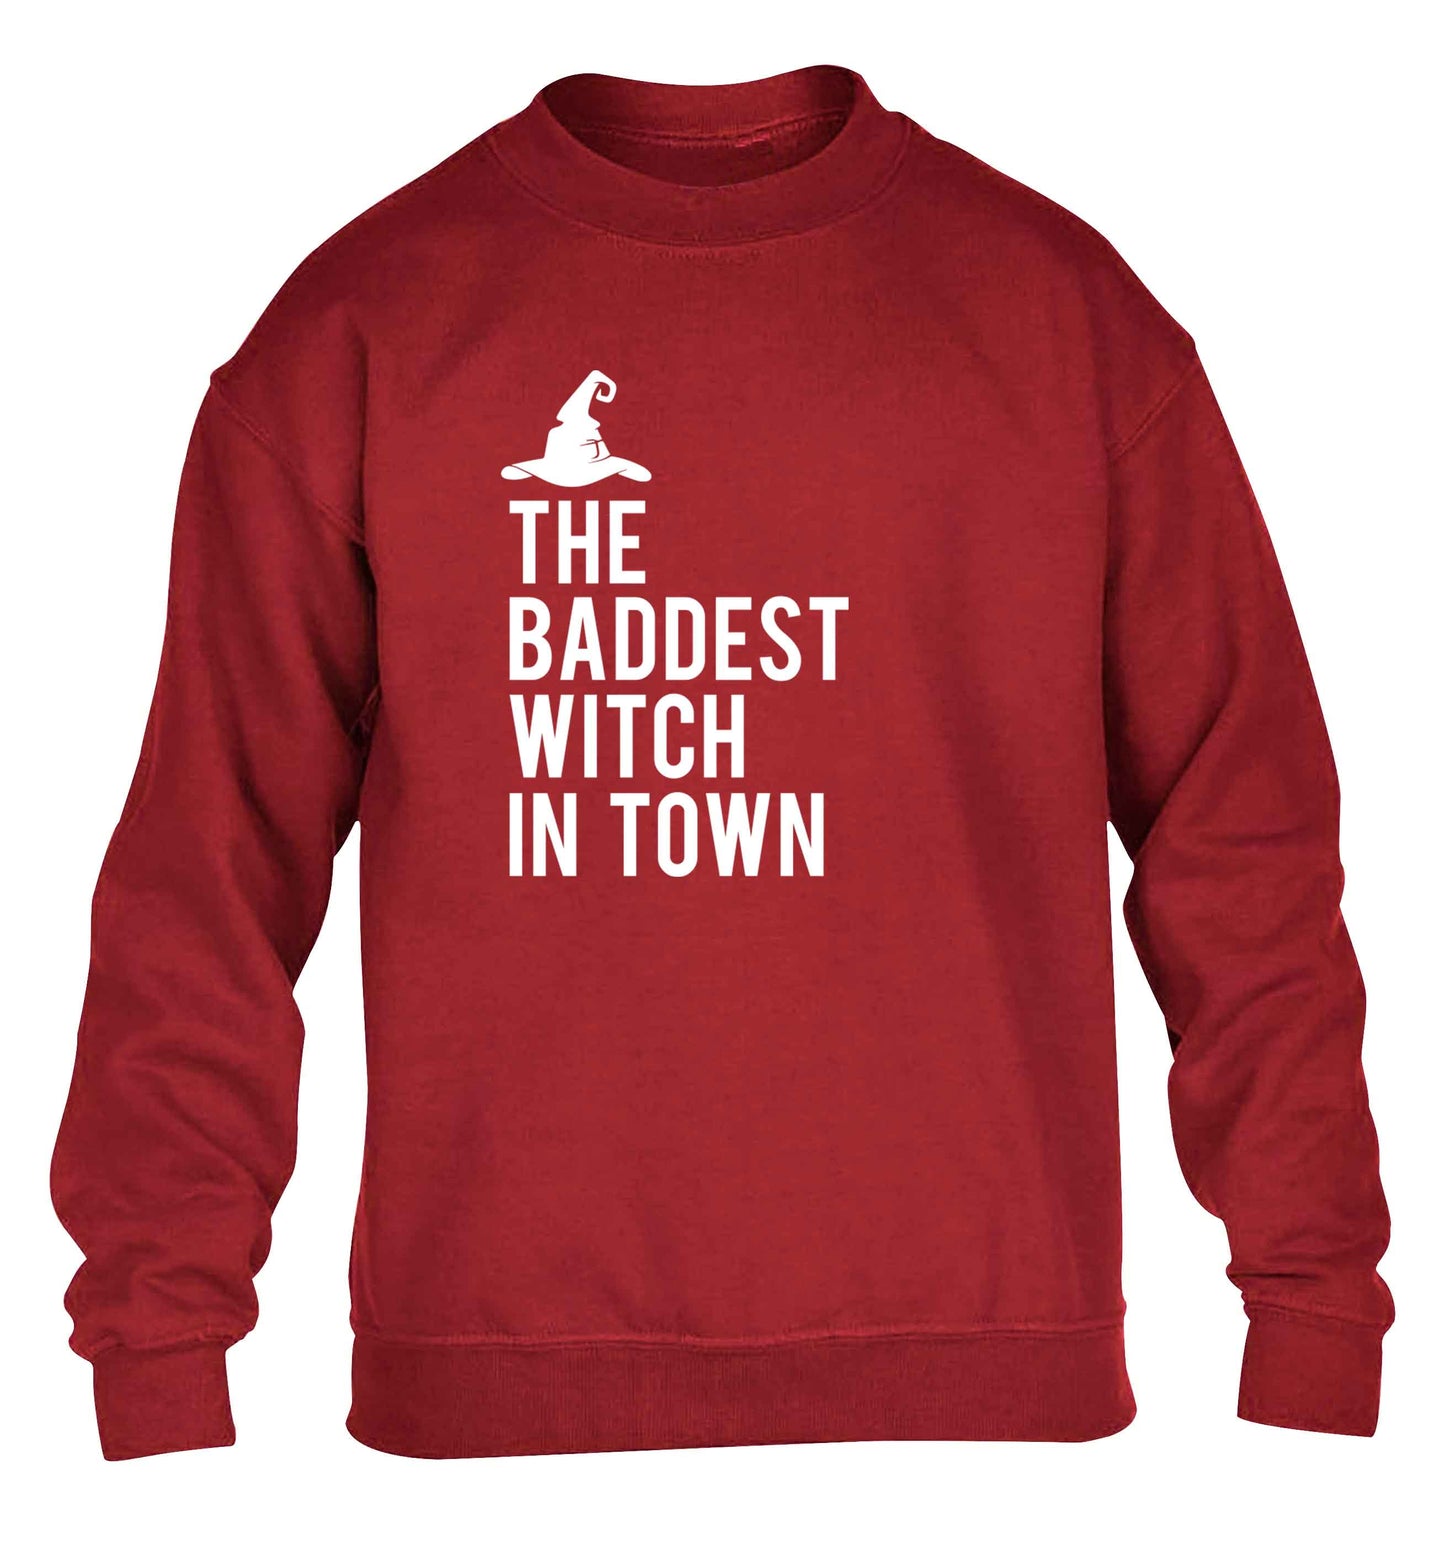 Badest witch in town children's grey sweater 12-13 Years